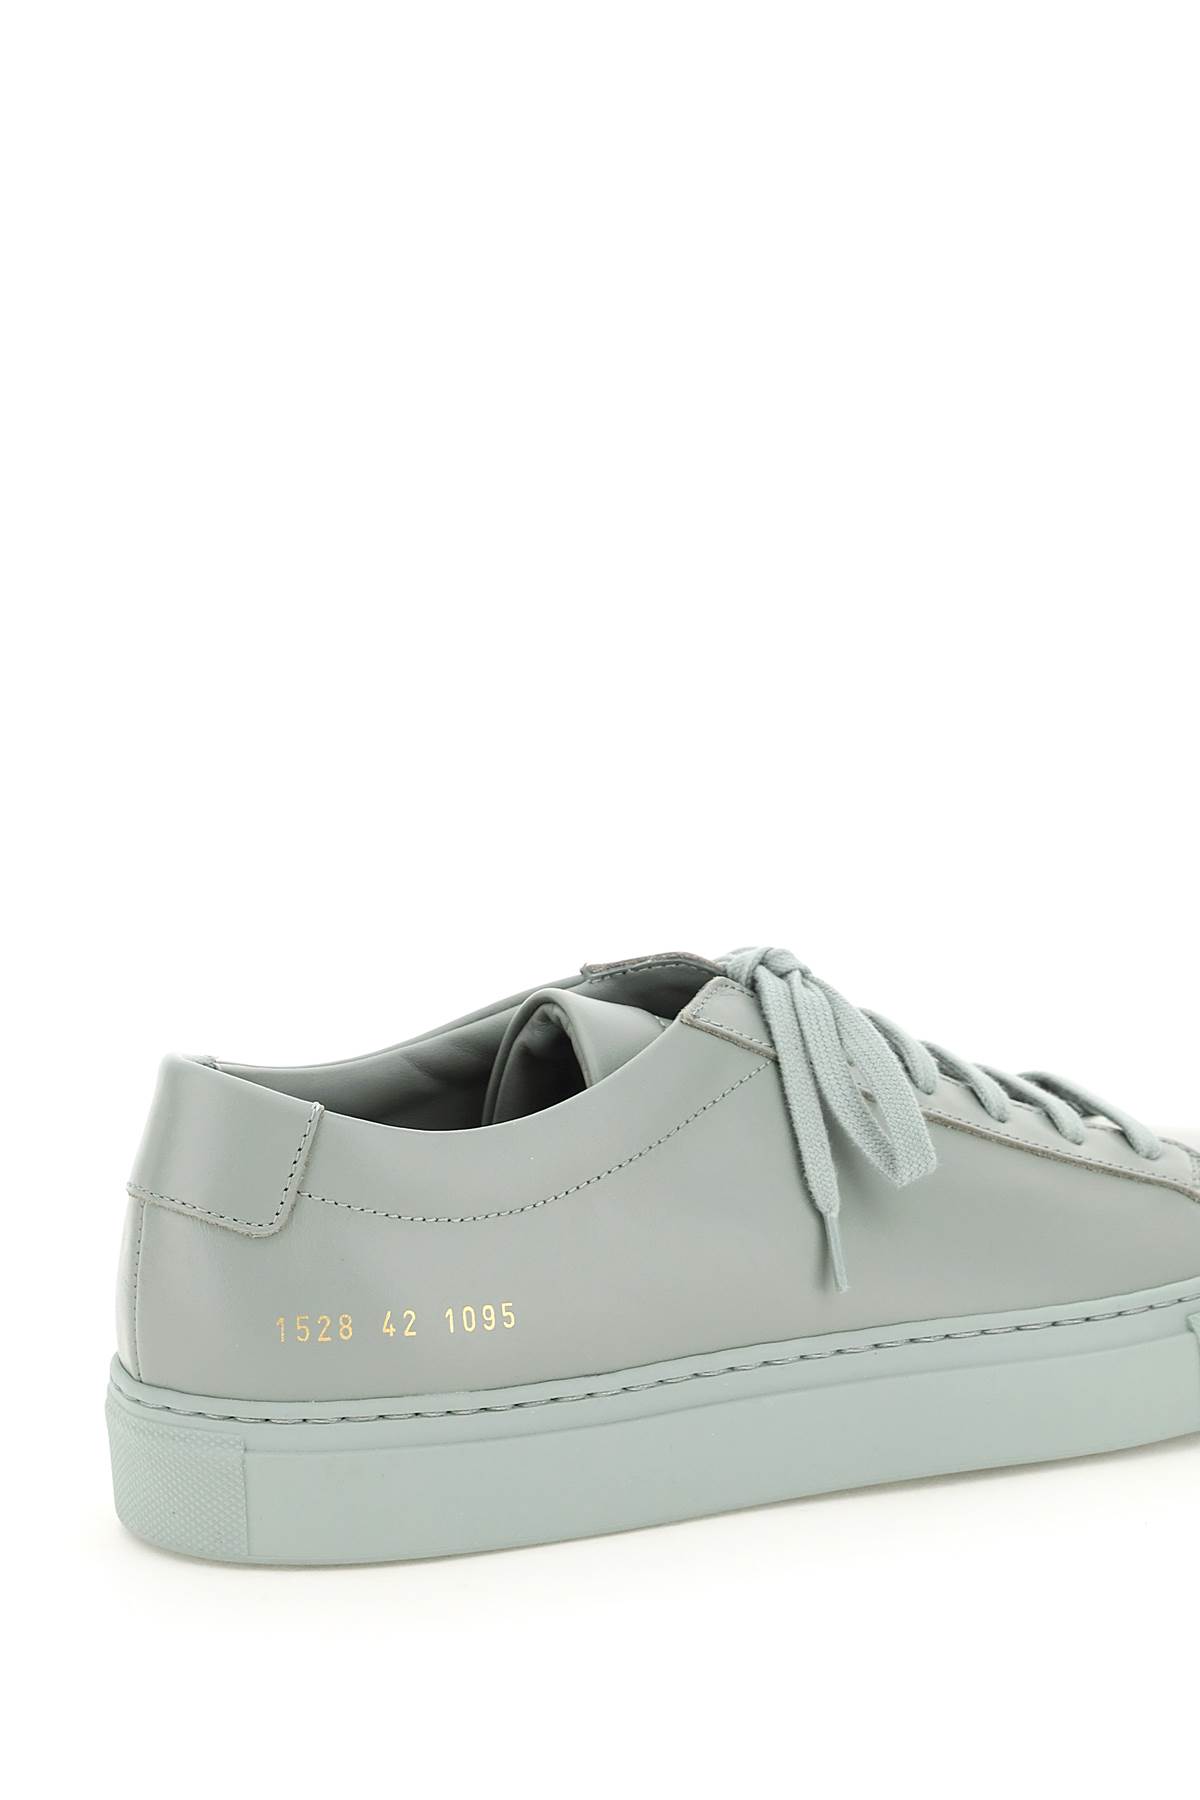 Shop Common Projects Original Achilles Low Sneakers In Vintage Green (green)